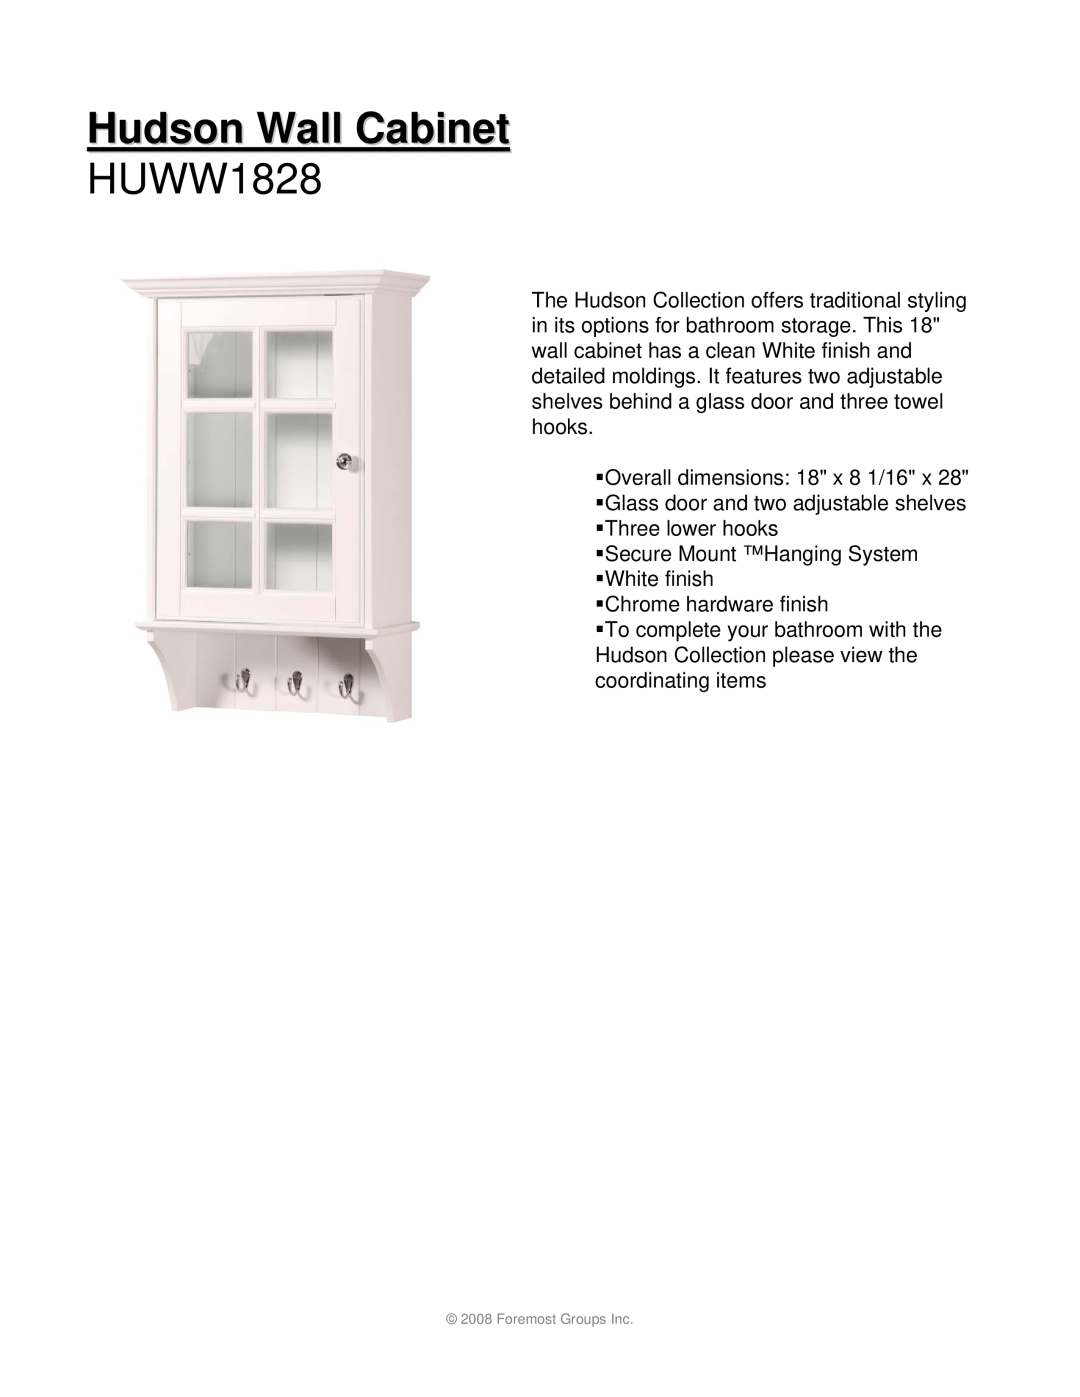 Hudson Sales & Engineering HUWT2066, HUWS2412, HUWF1534 dimensions Hudson Wall Cabinet, HUWW1828 